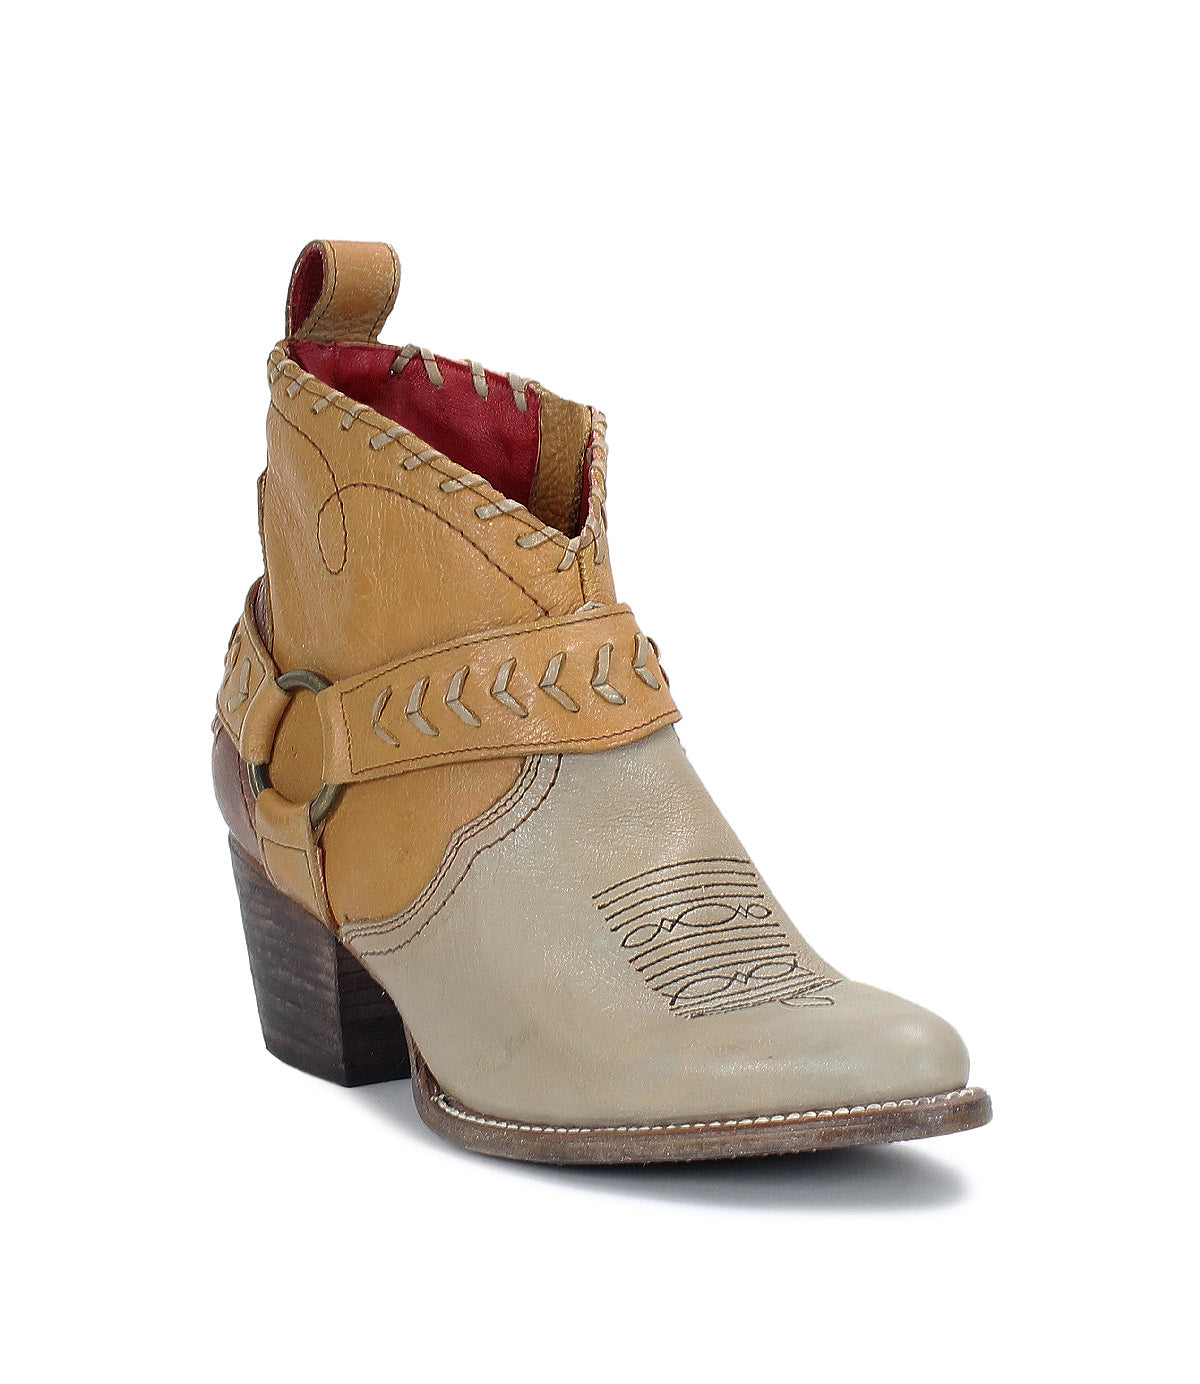 A women's ankle boot in Tania and Bed Stu.